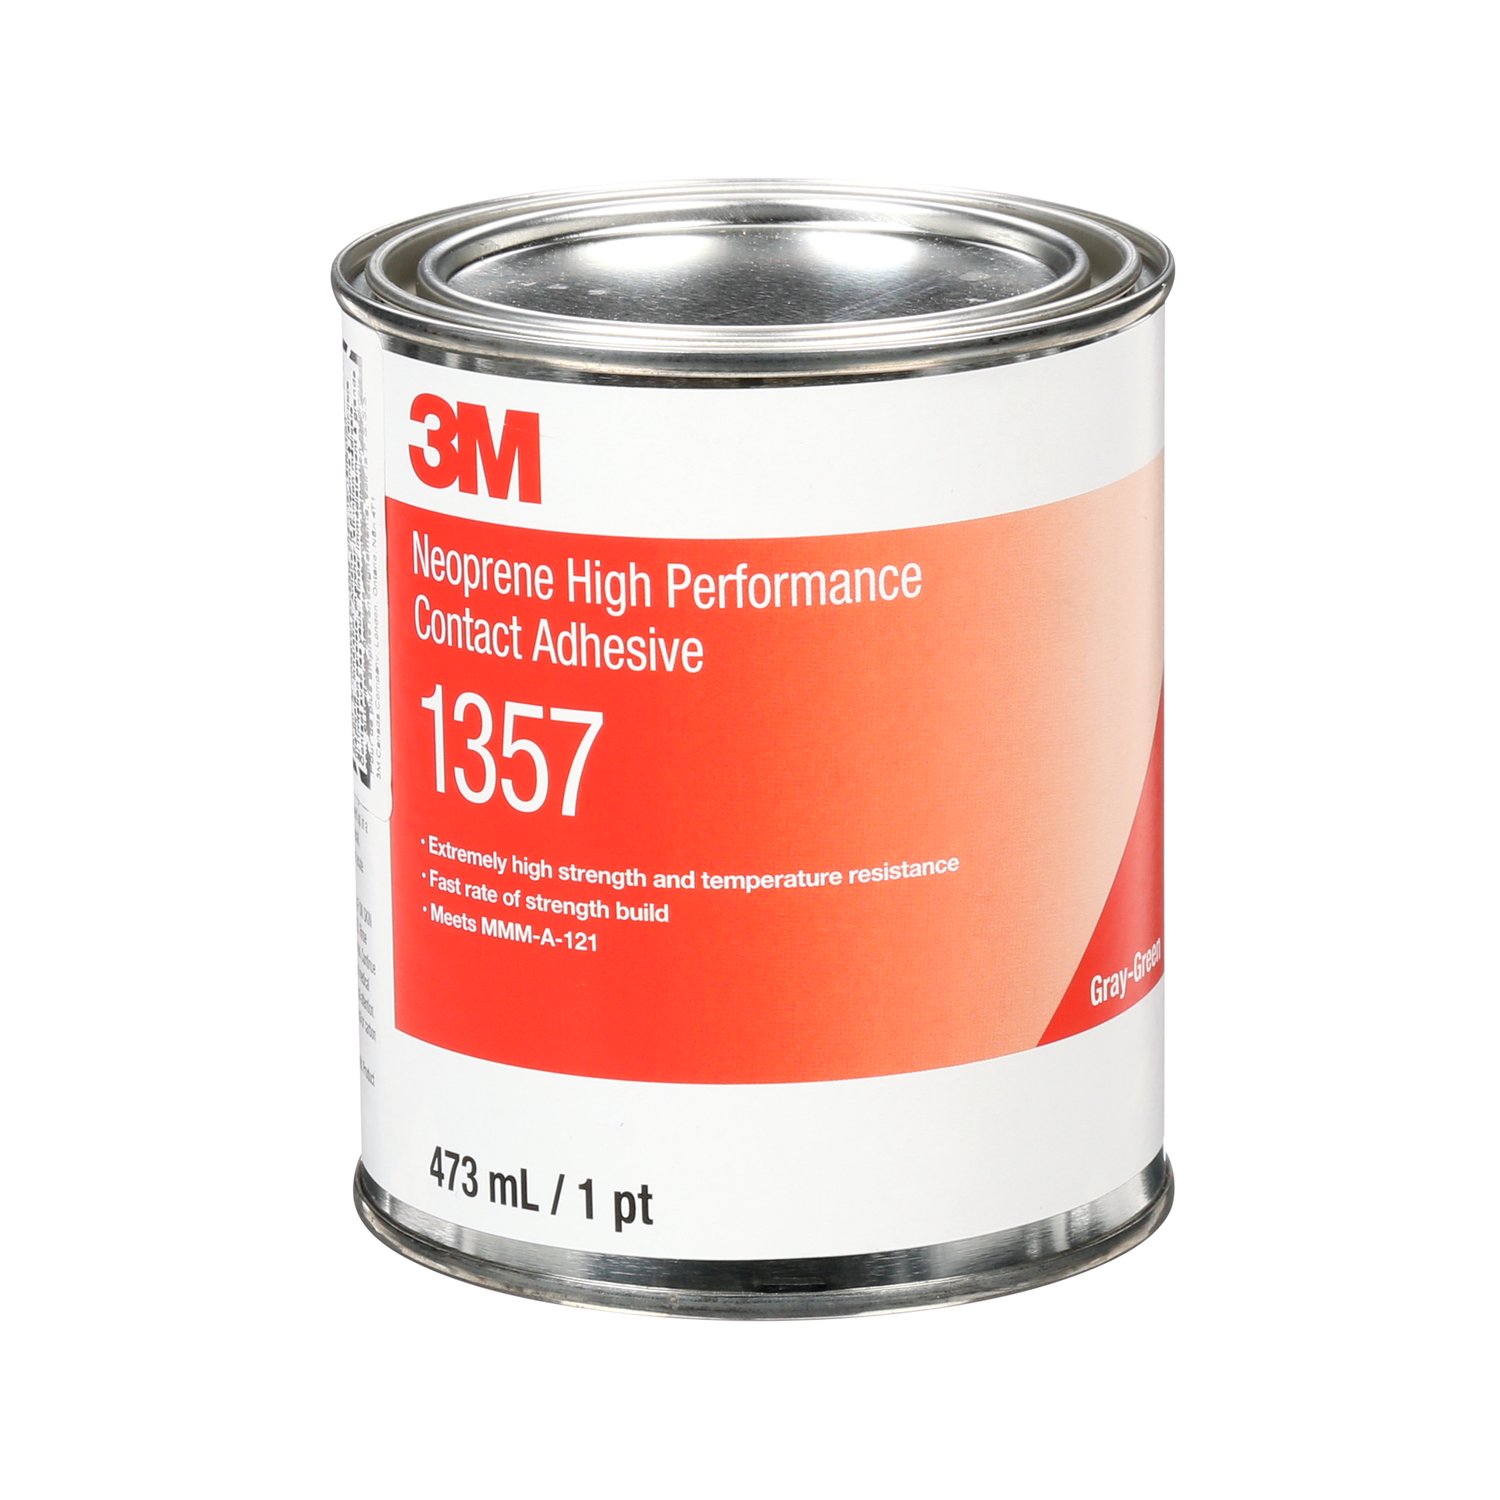 7000121201 - 3M Neoprene High Performance Contact Adhesive 1357, Gray-Green, 1 Pint
Can, 12/case